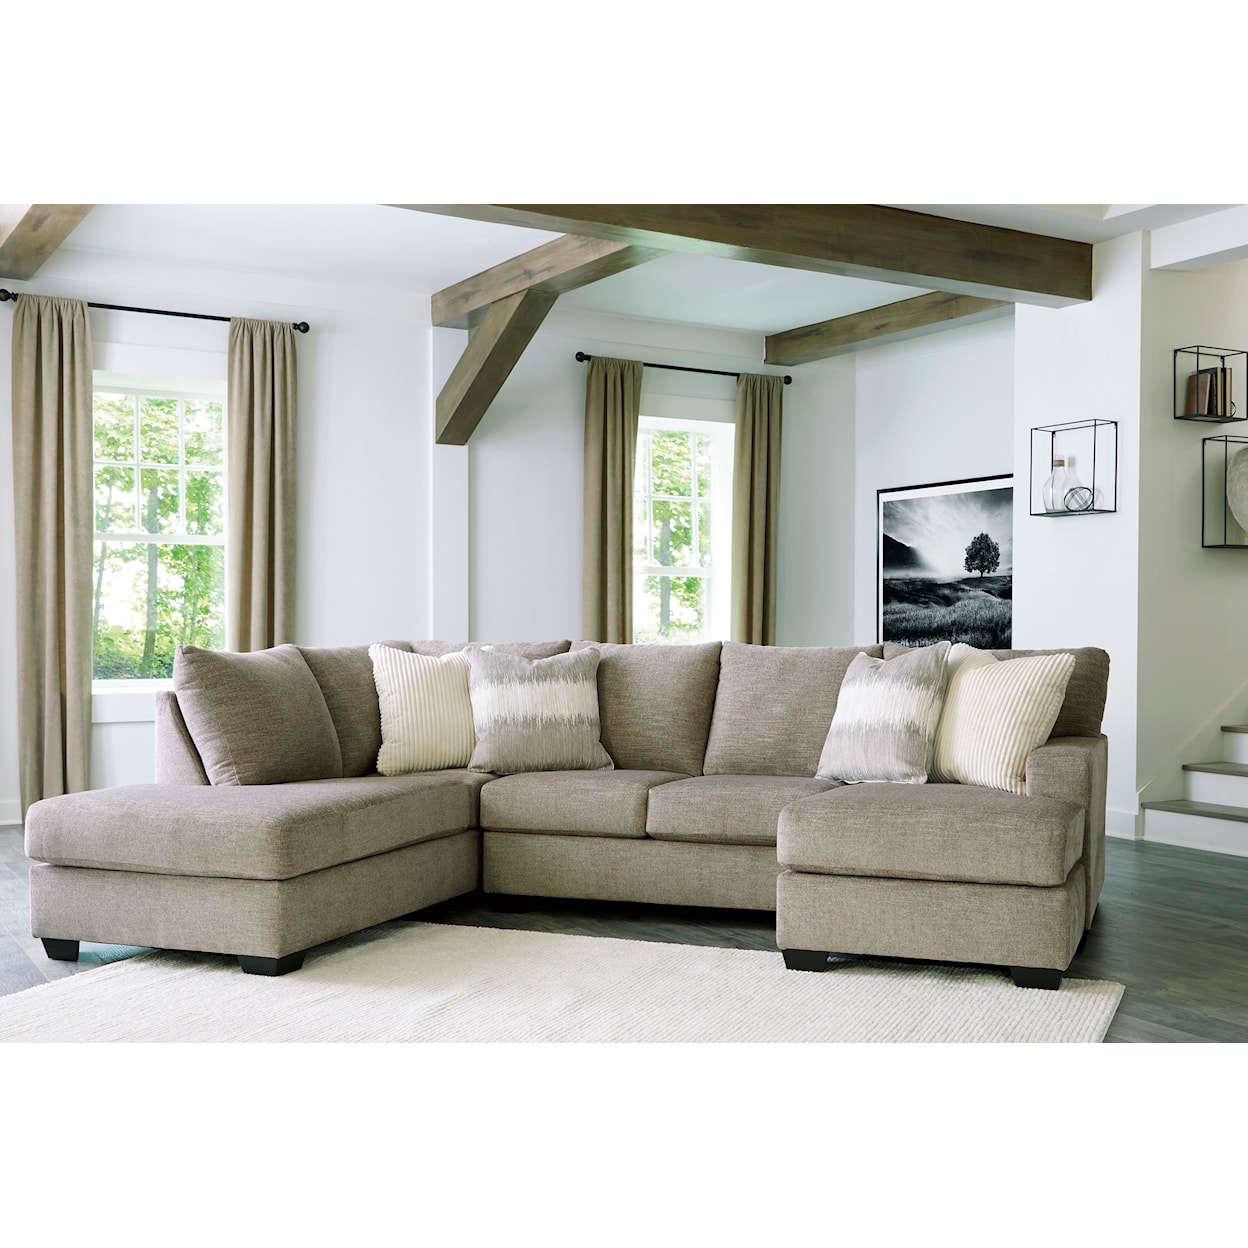 Benchcraft Creswell 2-Piece Sectional with 2 Chaises